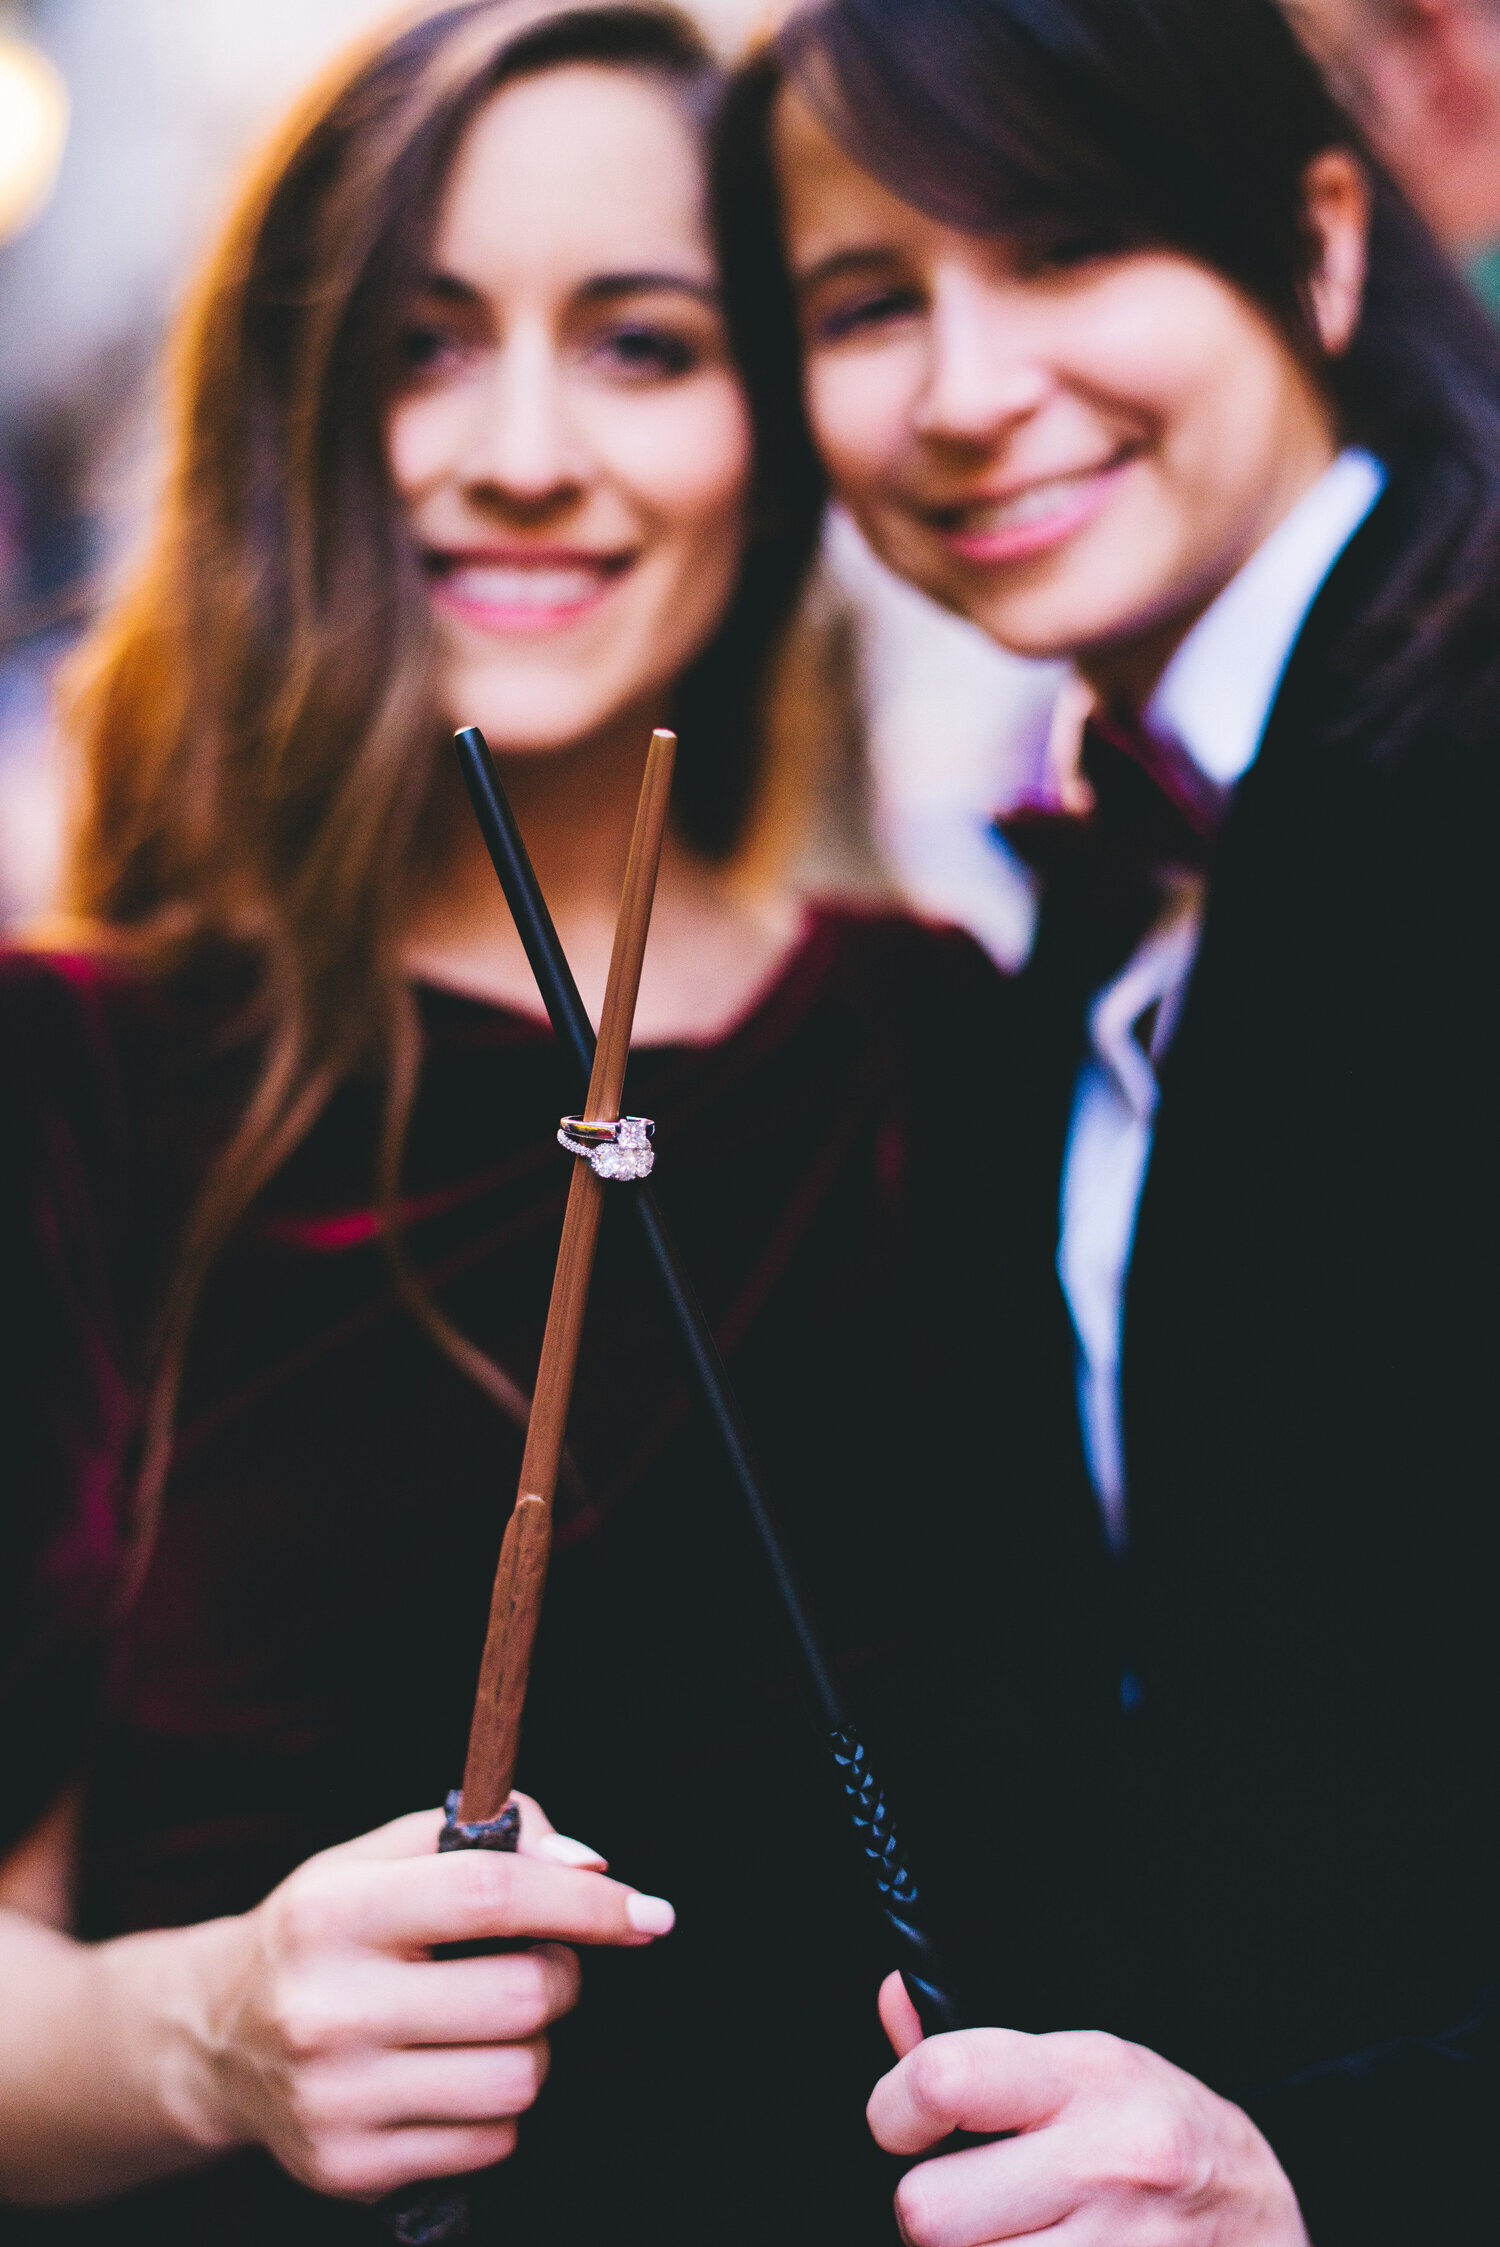 Harry Potter Themed Engagement